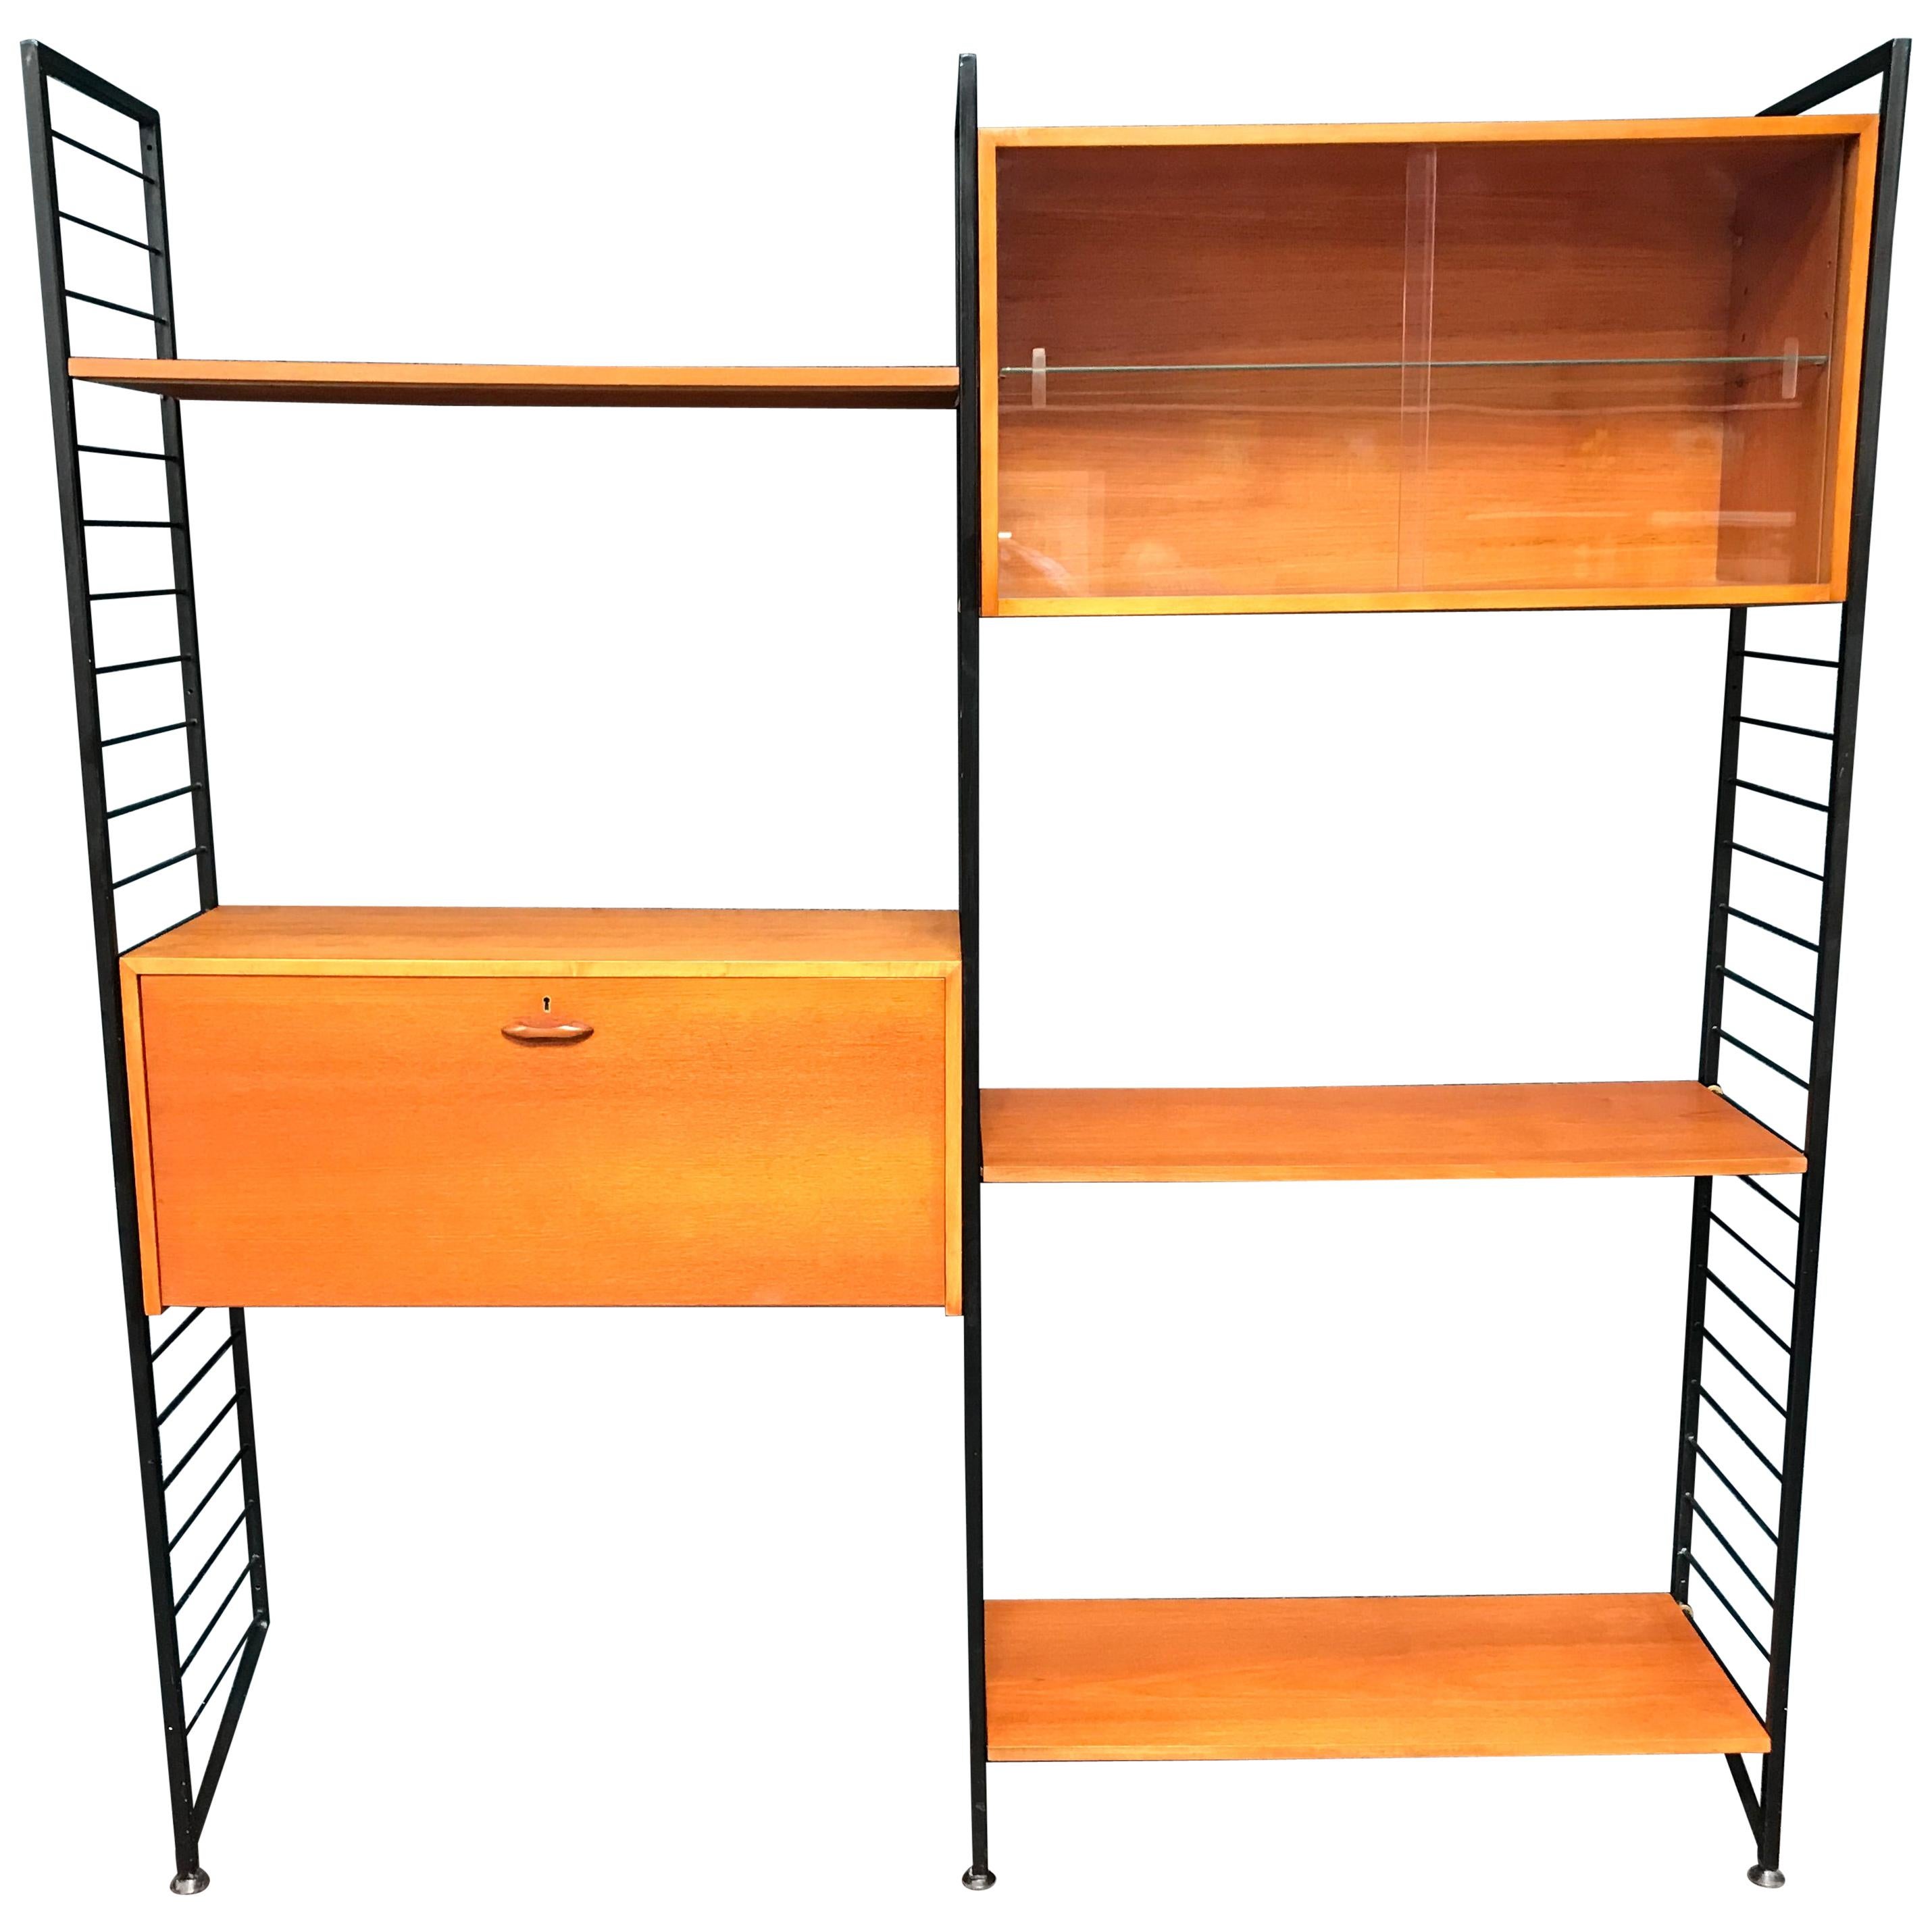 2 Bay Ladderax Teak Midcentury Shelving System with Bureau by Robert Heal For Sale